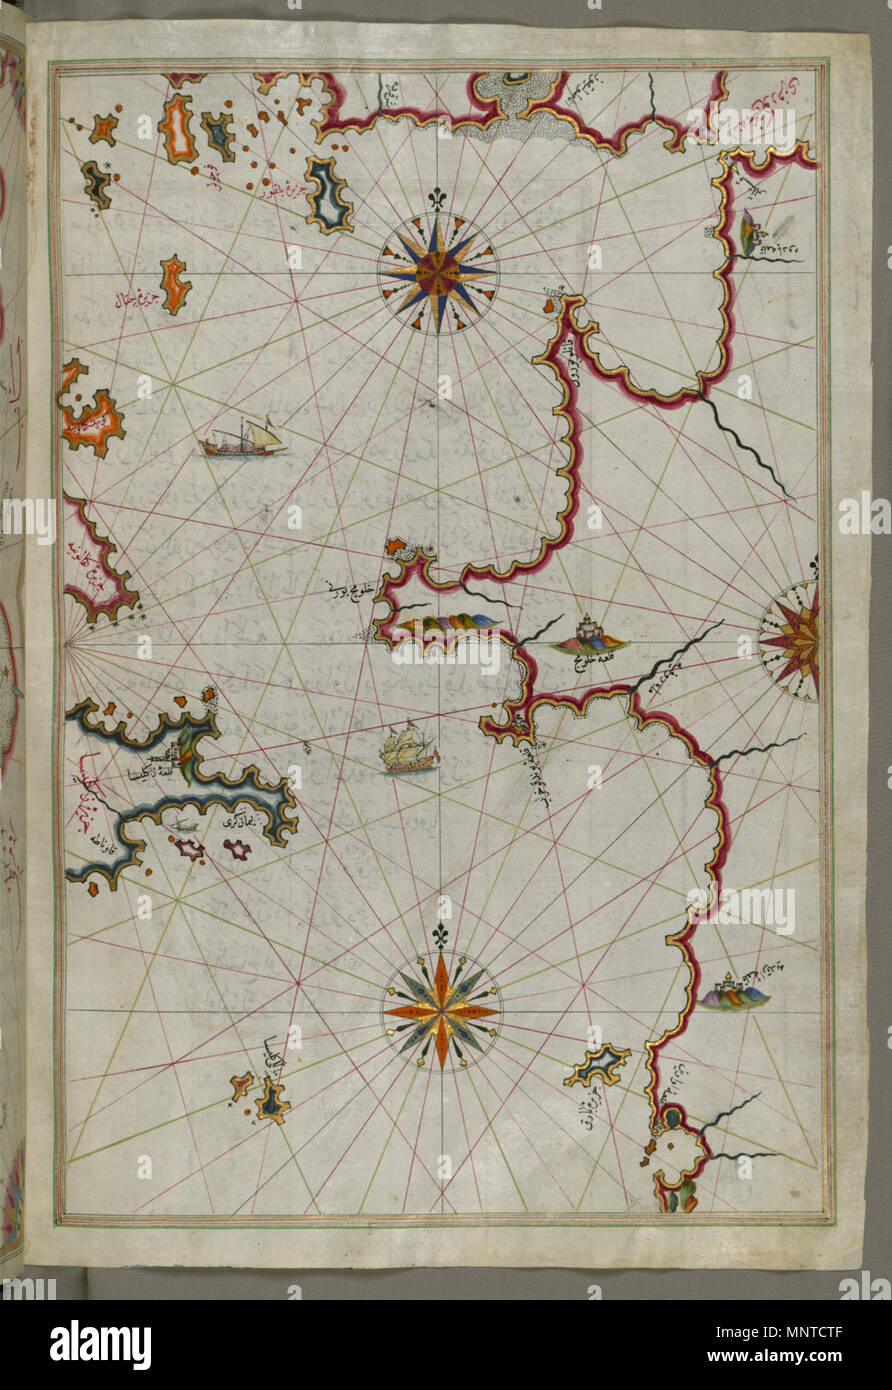 Piri Reis (Turkish, 1465-1555). 'Leaf from Book on Navigation,' 17th-18th century. ink, paint, and gold on paper. Walters Art Museum (W.658.136B): Acquired by Henry Walters. W.658.136b 1004 Piri Reis - Map of the Western Part of the Peloponnese Peninsula Opposite the Zakynthos Island - Walters W658136B - Full Page Stock Photo